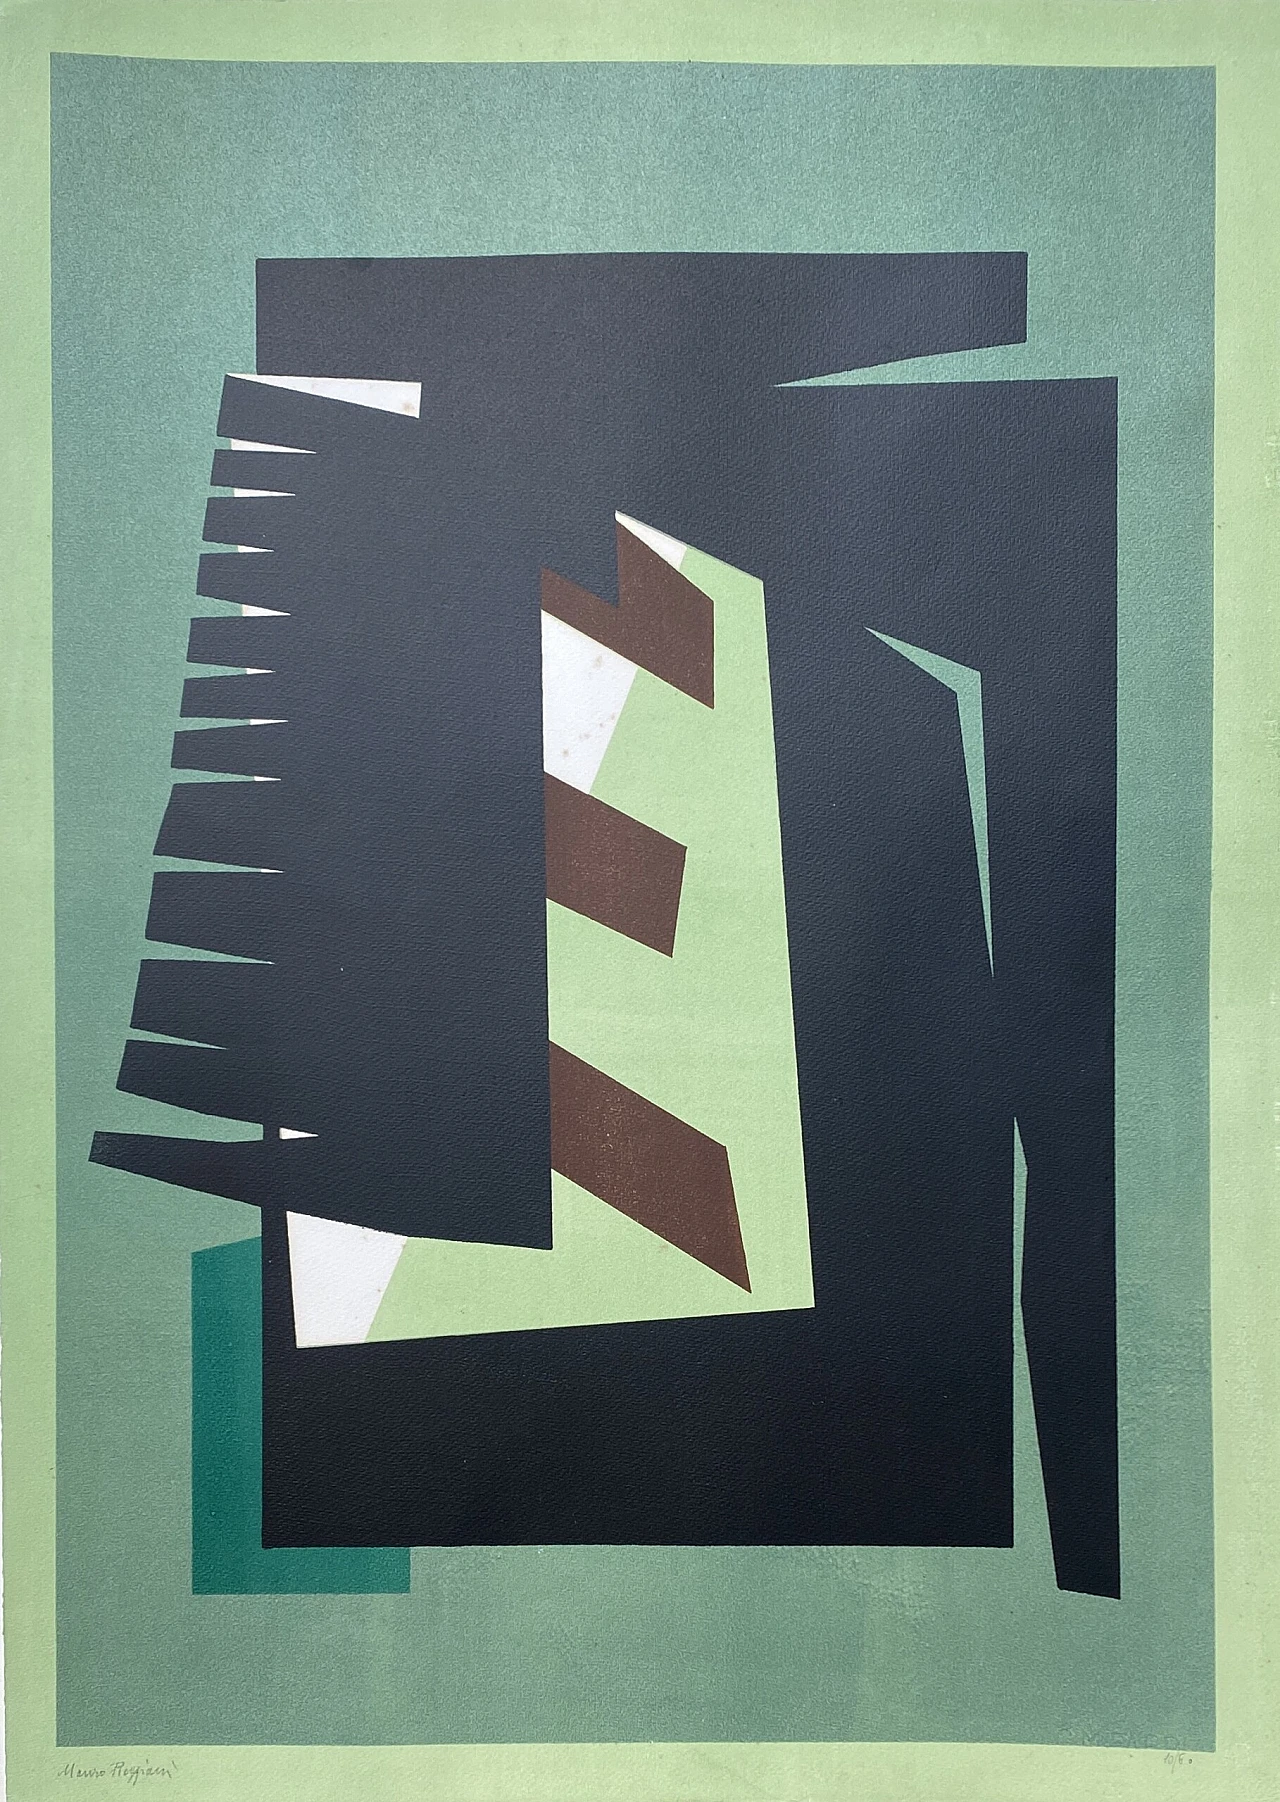 Mauro Reggiani, abstract composition, lithography 1